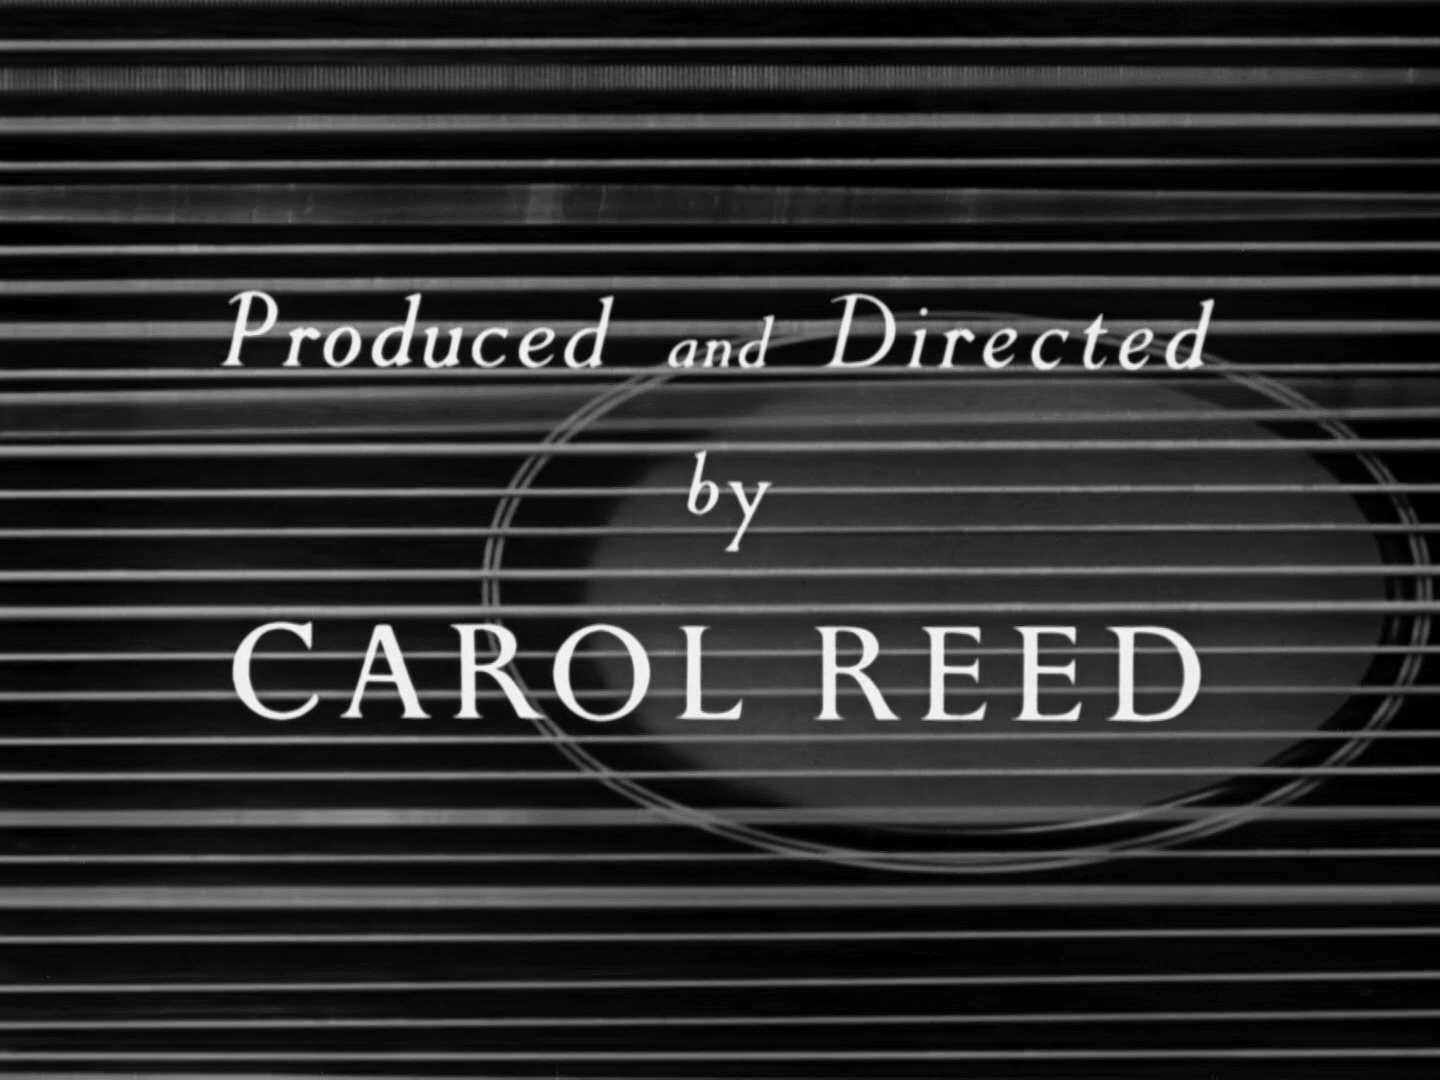 Main title from The Third Man (1949) (14). Produced and directed by Carol Reed